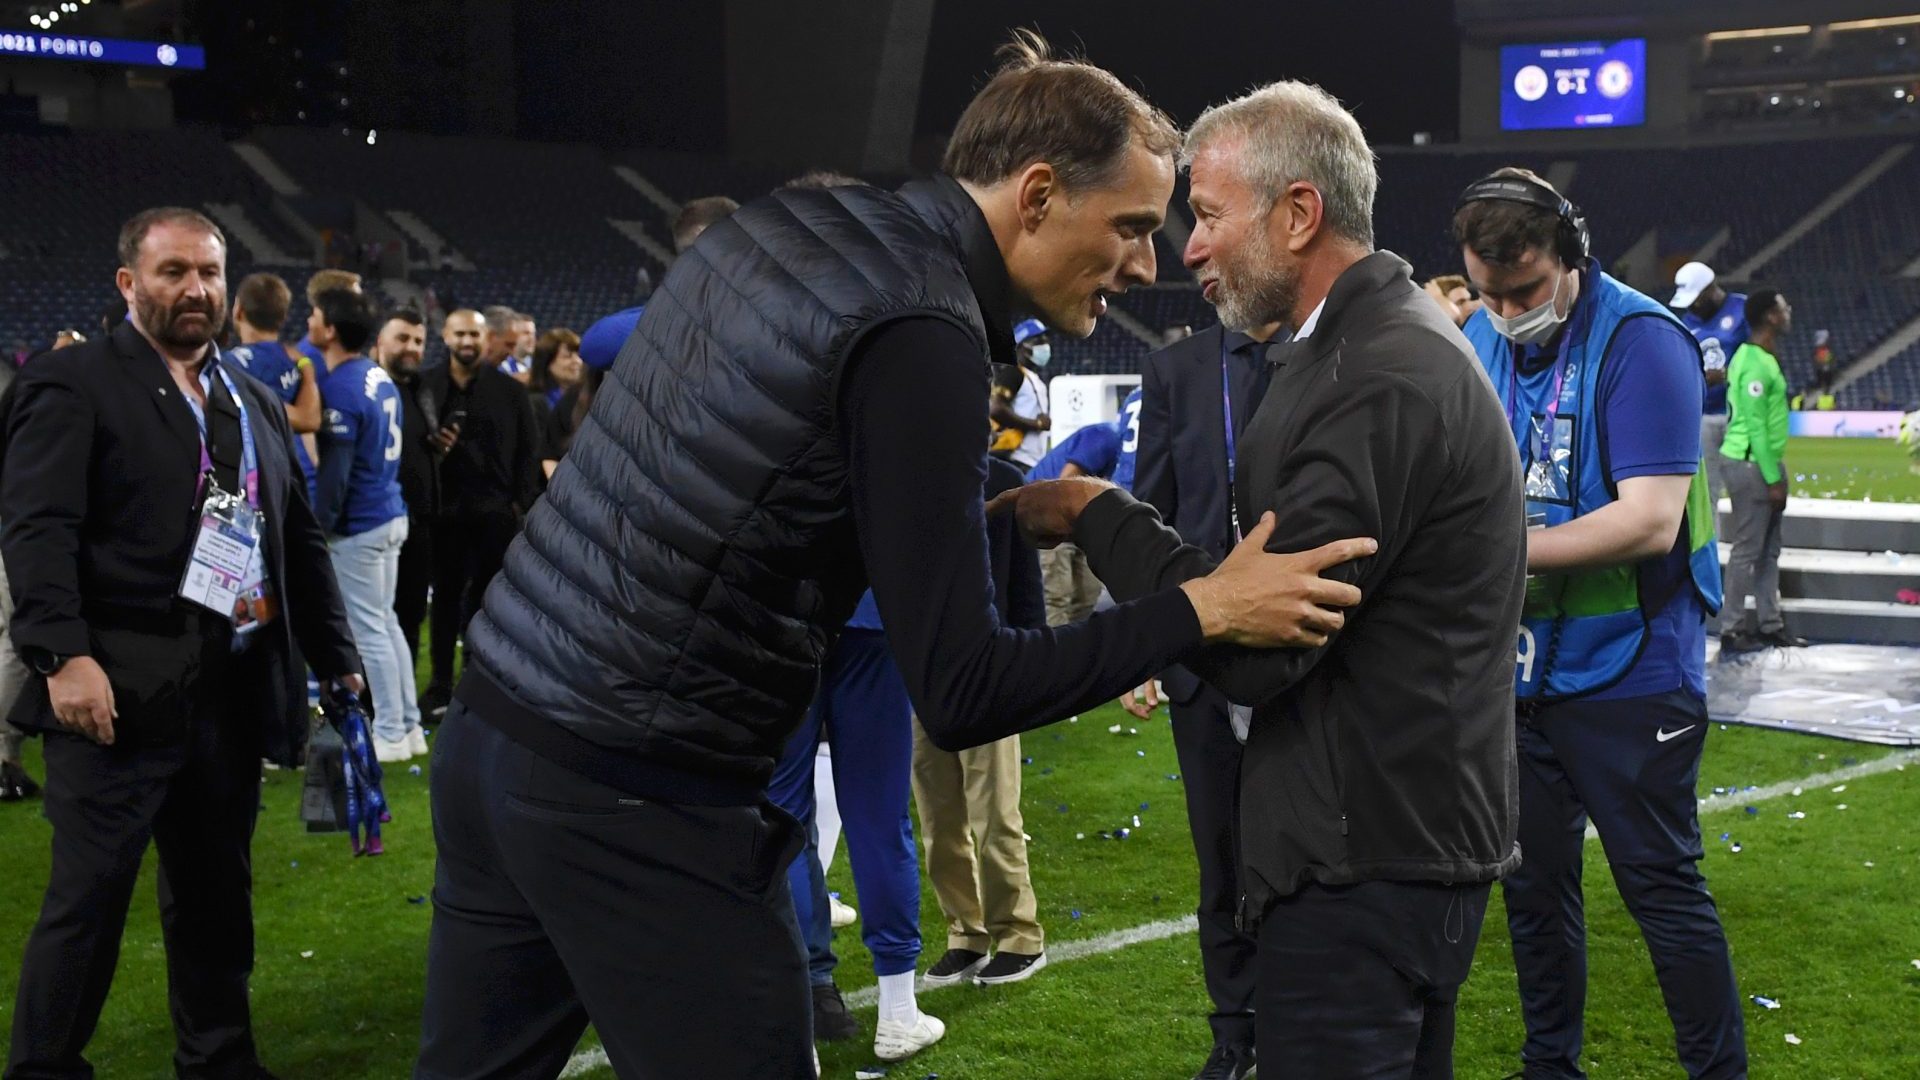 Thomas Tuchel and Roman Abramovich celebrate Chelsea’s 2021 Champions
League final victory againstManchester City. Photo: Alex Caparros/Uefa/
Getty Images